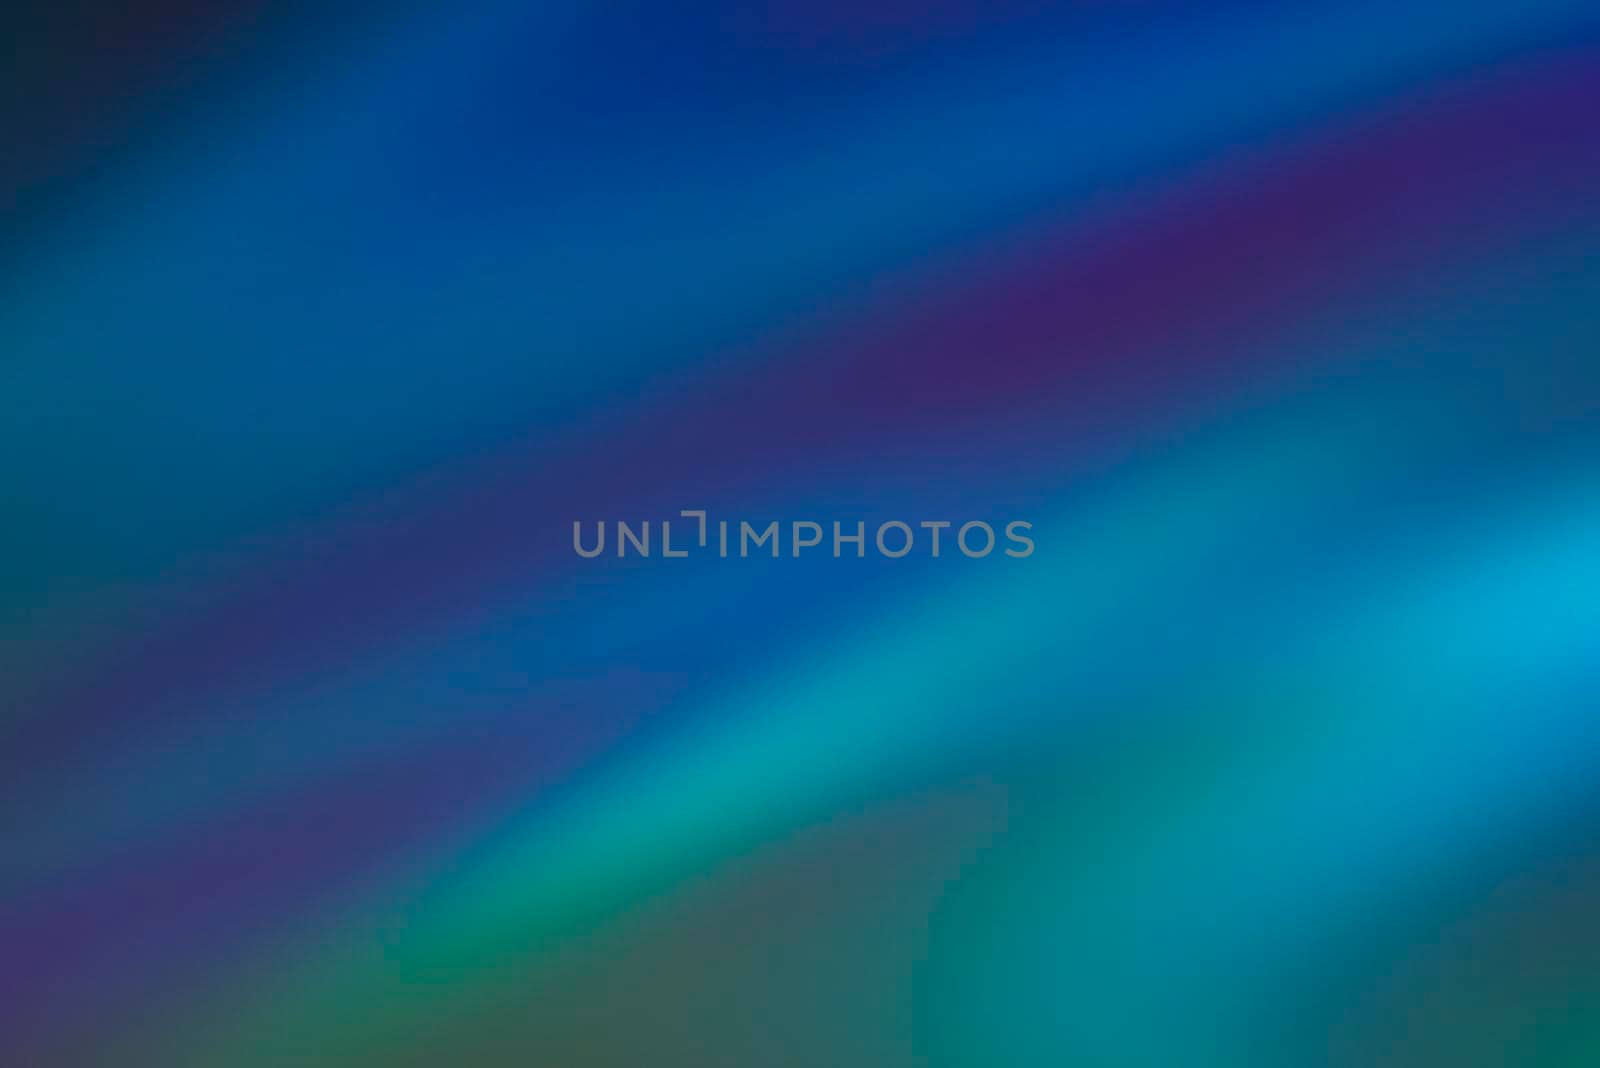 Abstract blue and turquoise blurred light background for mockups. Trendy creative gradient